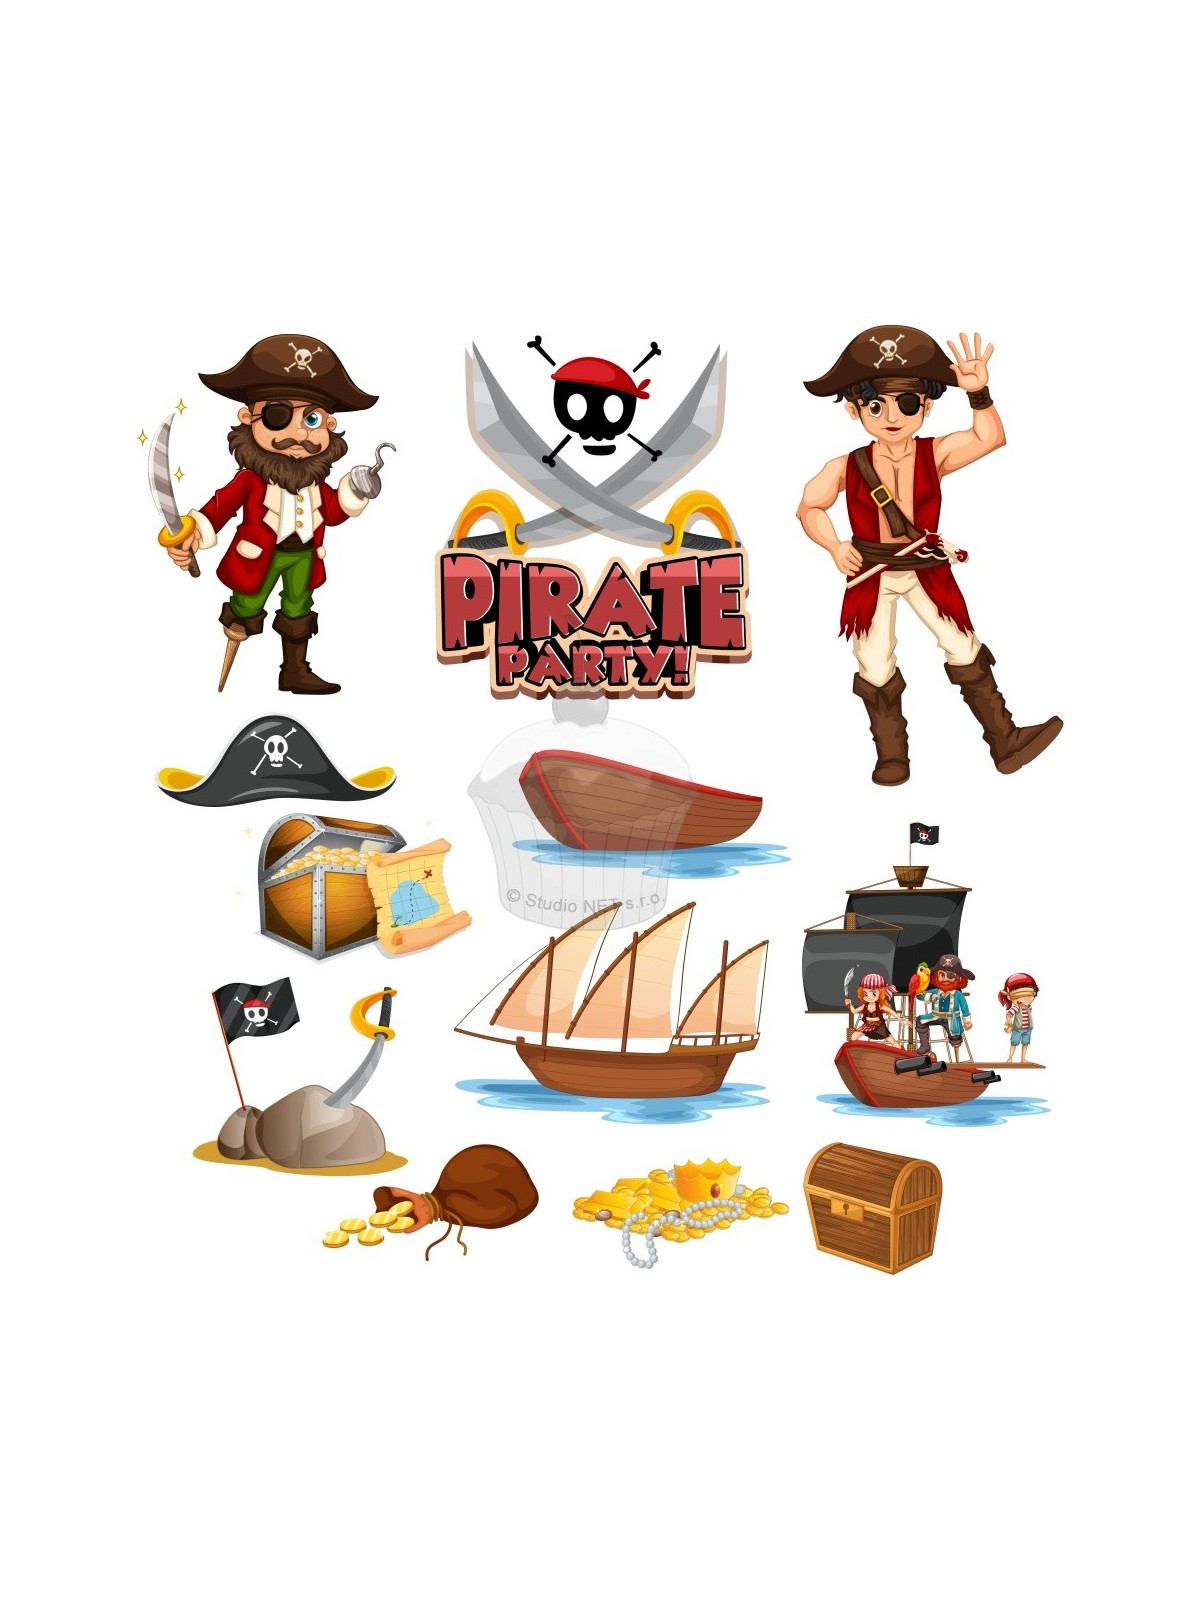 Edible paper "Pirate party" A4